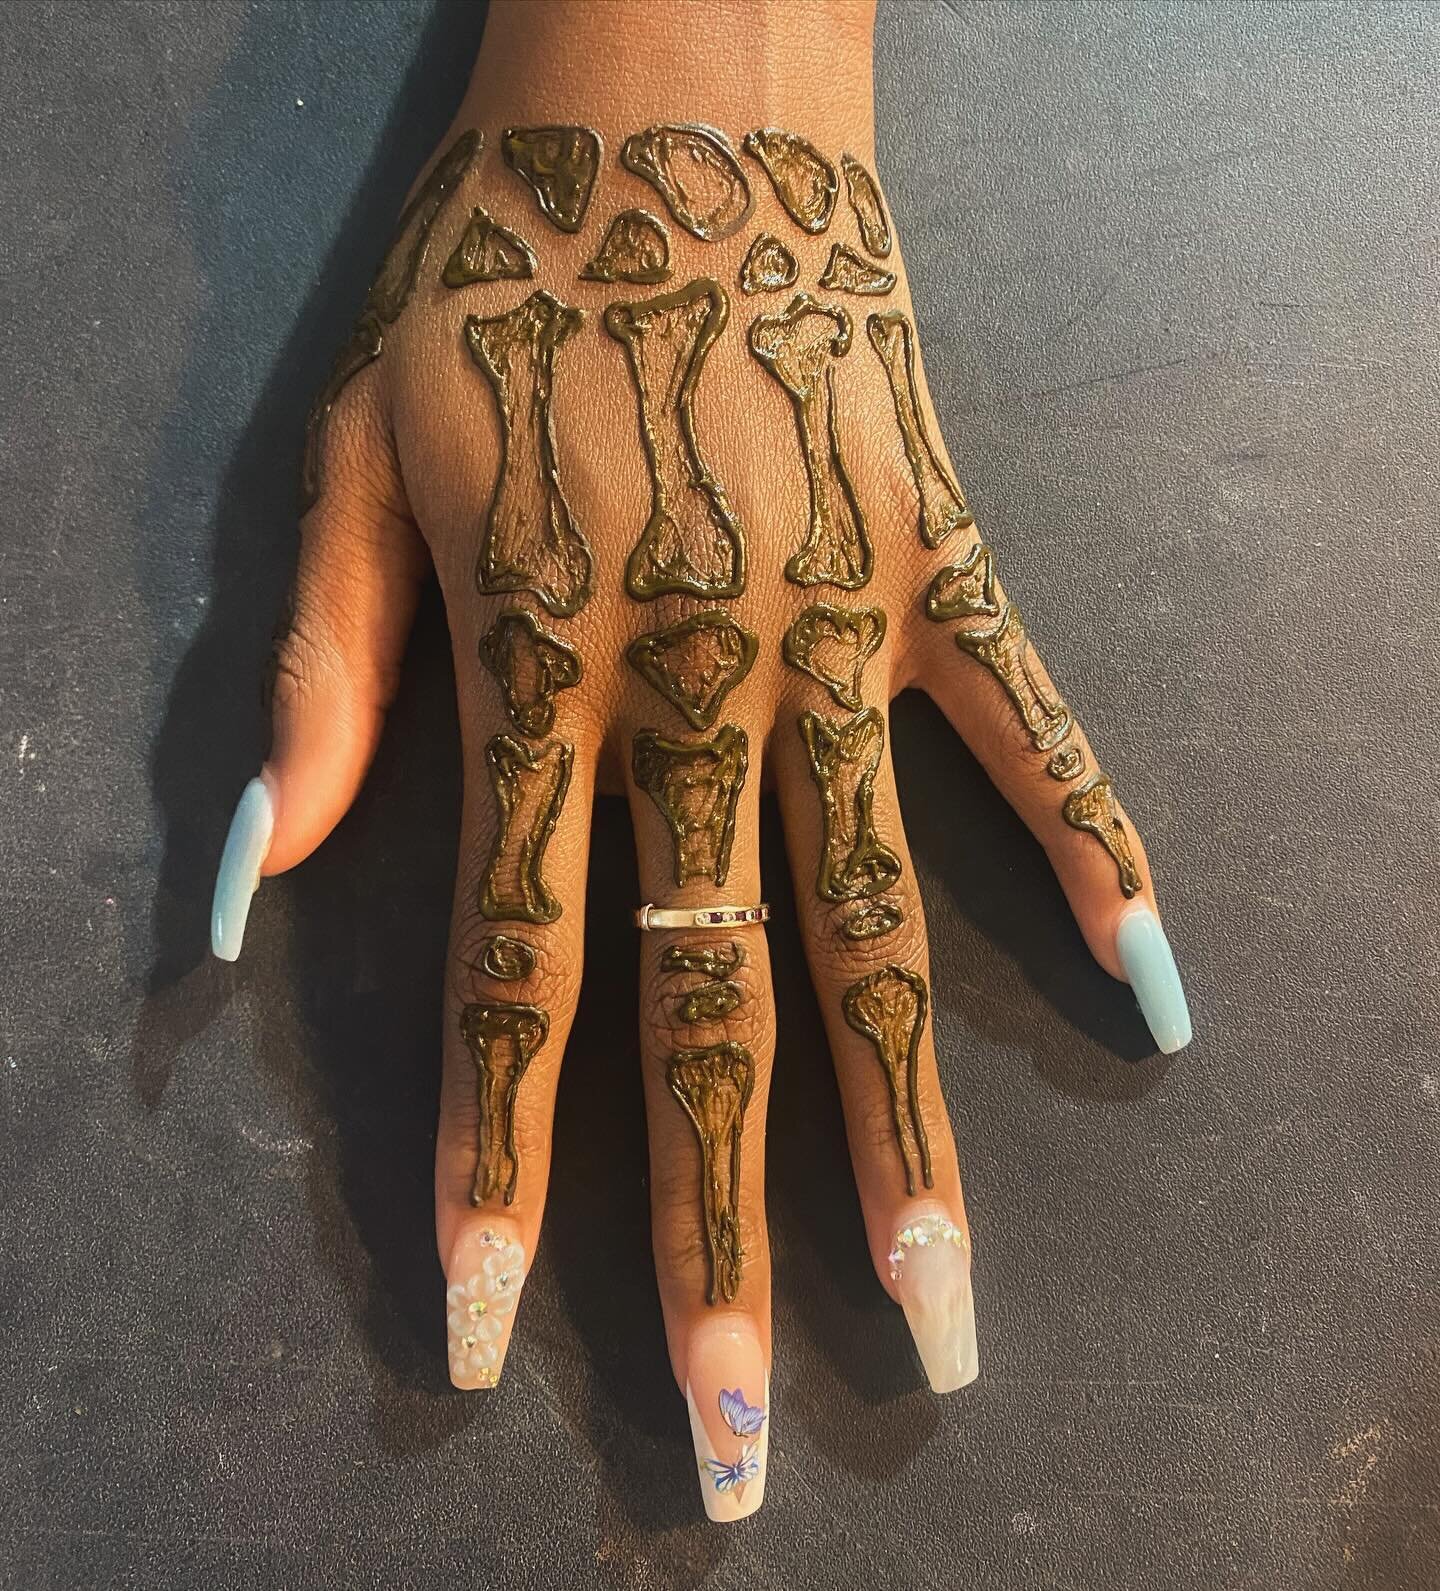 Who says January is too early for spooky things?? 👻 💀 

Did you know that you can ask for literally anything (within reason!) as a henna tattoo or face paint? Our many artists are so talented and love a good challenge!

#facepaint #painting #henna 